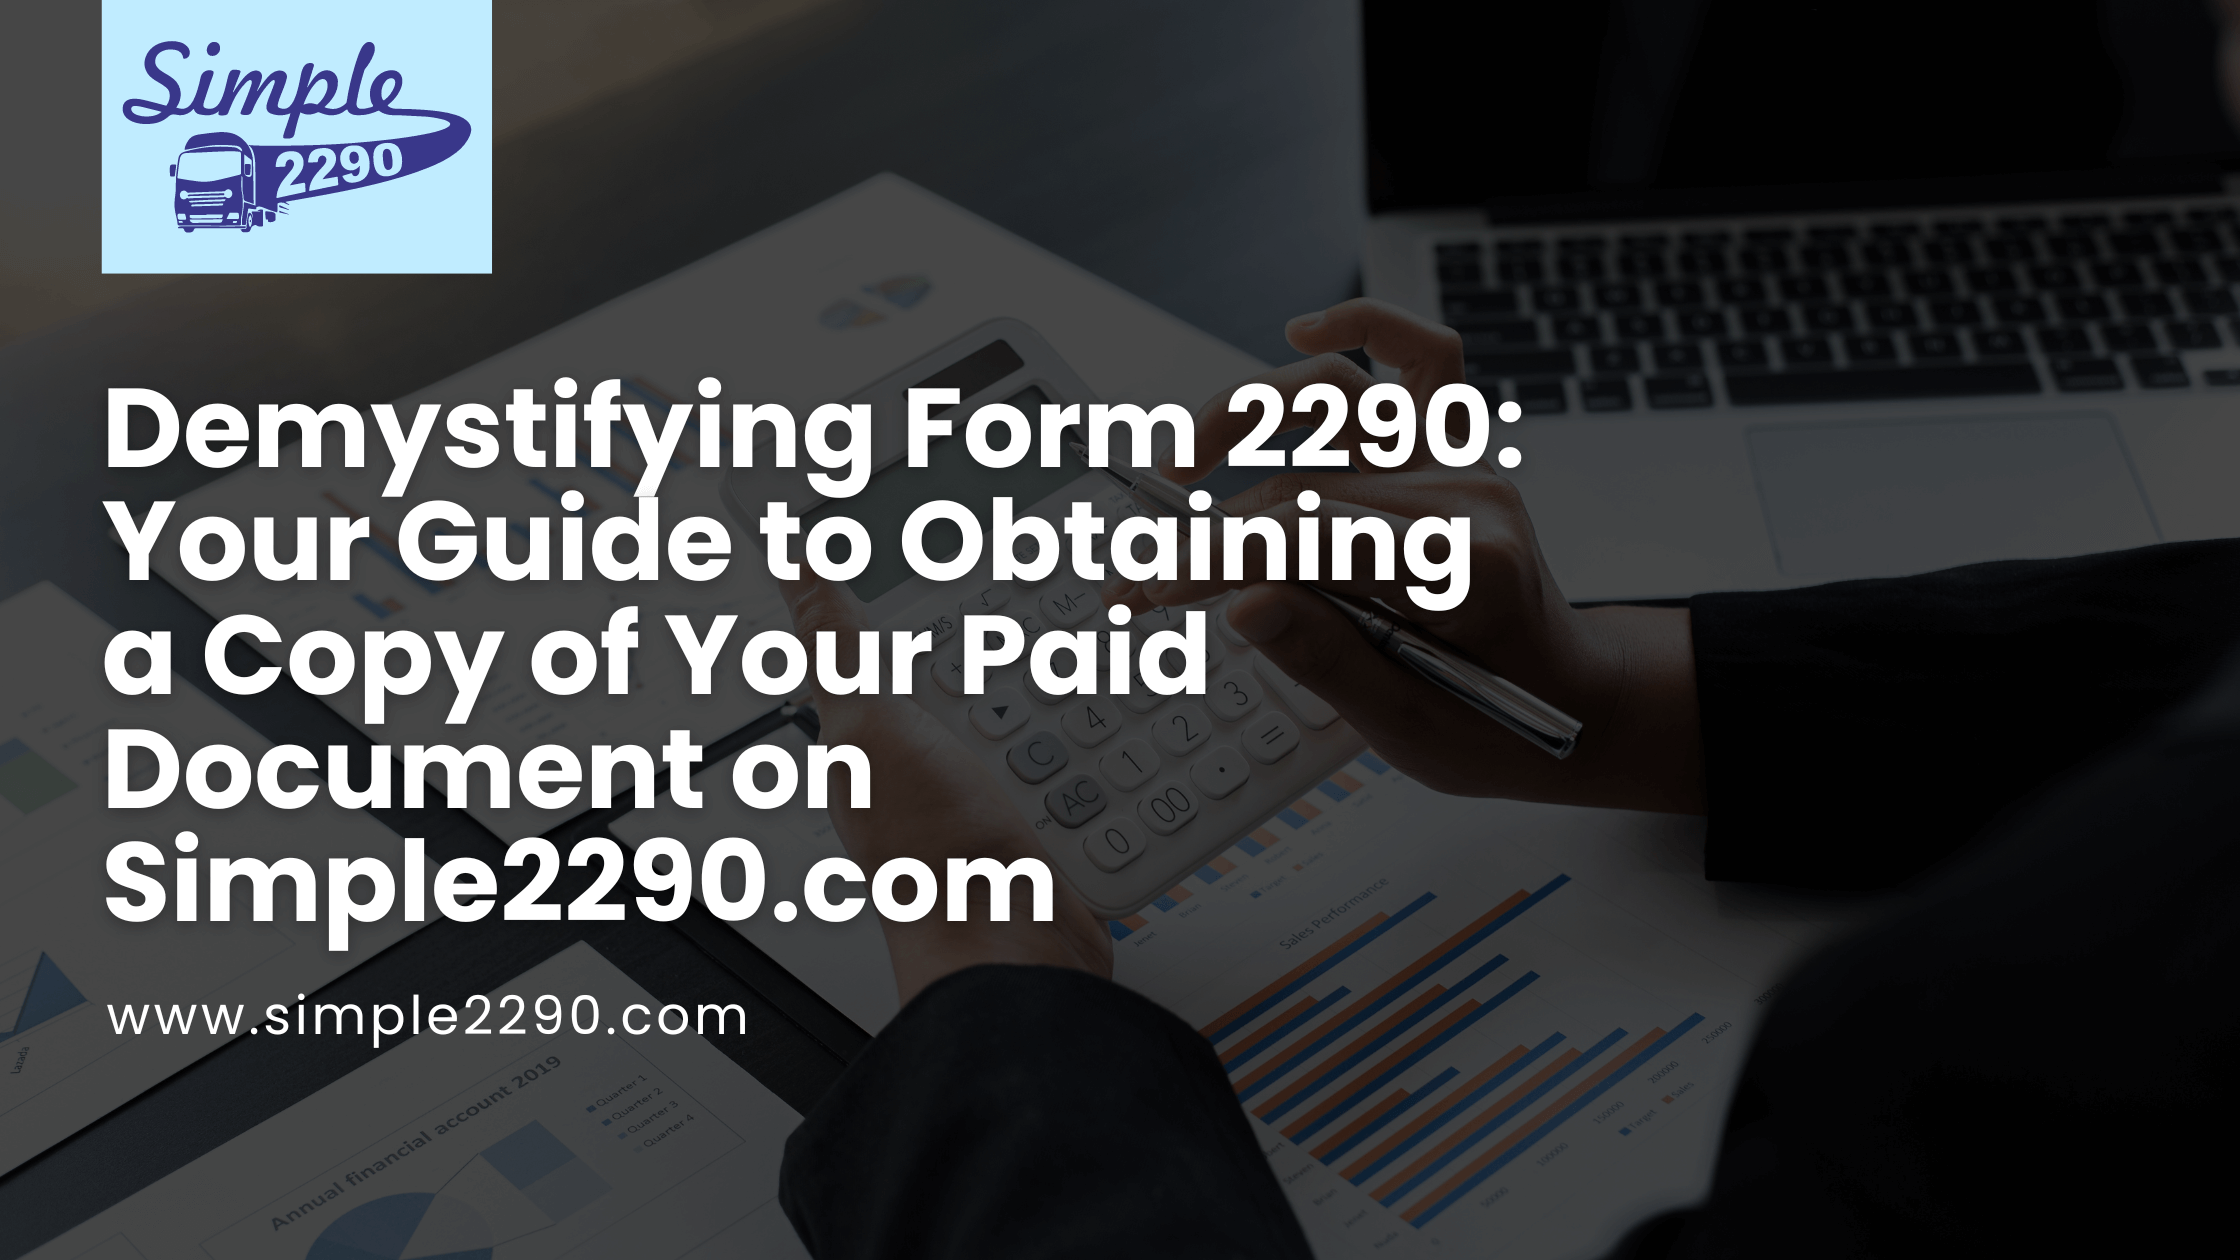 Demystifying Form 2290: Your Guide to Obtaining a Copy of Your Paid Document on Simple2290.com